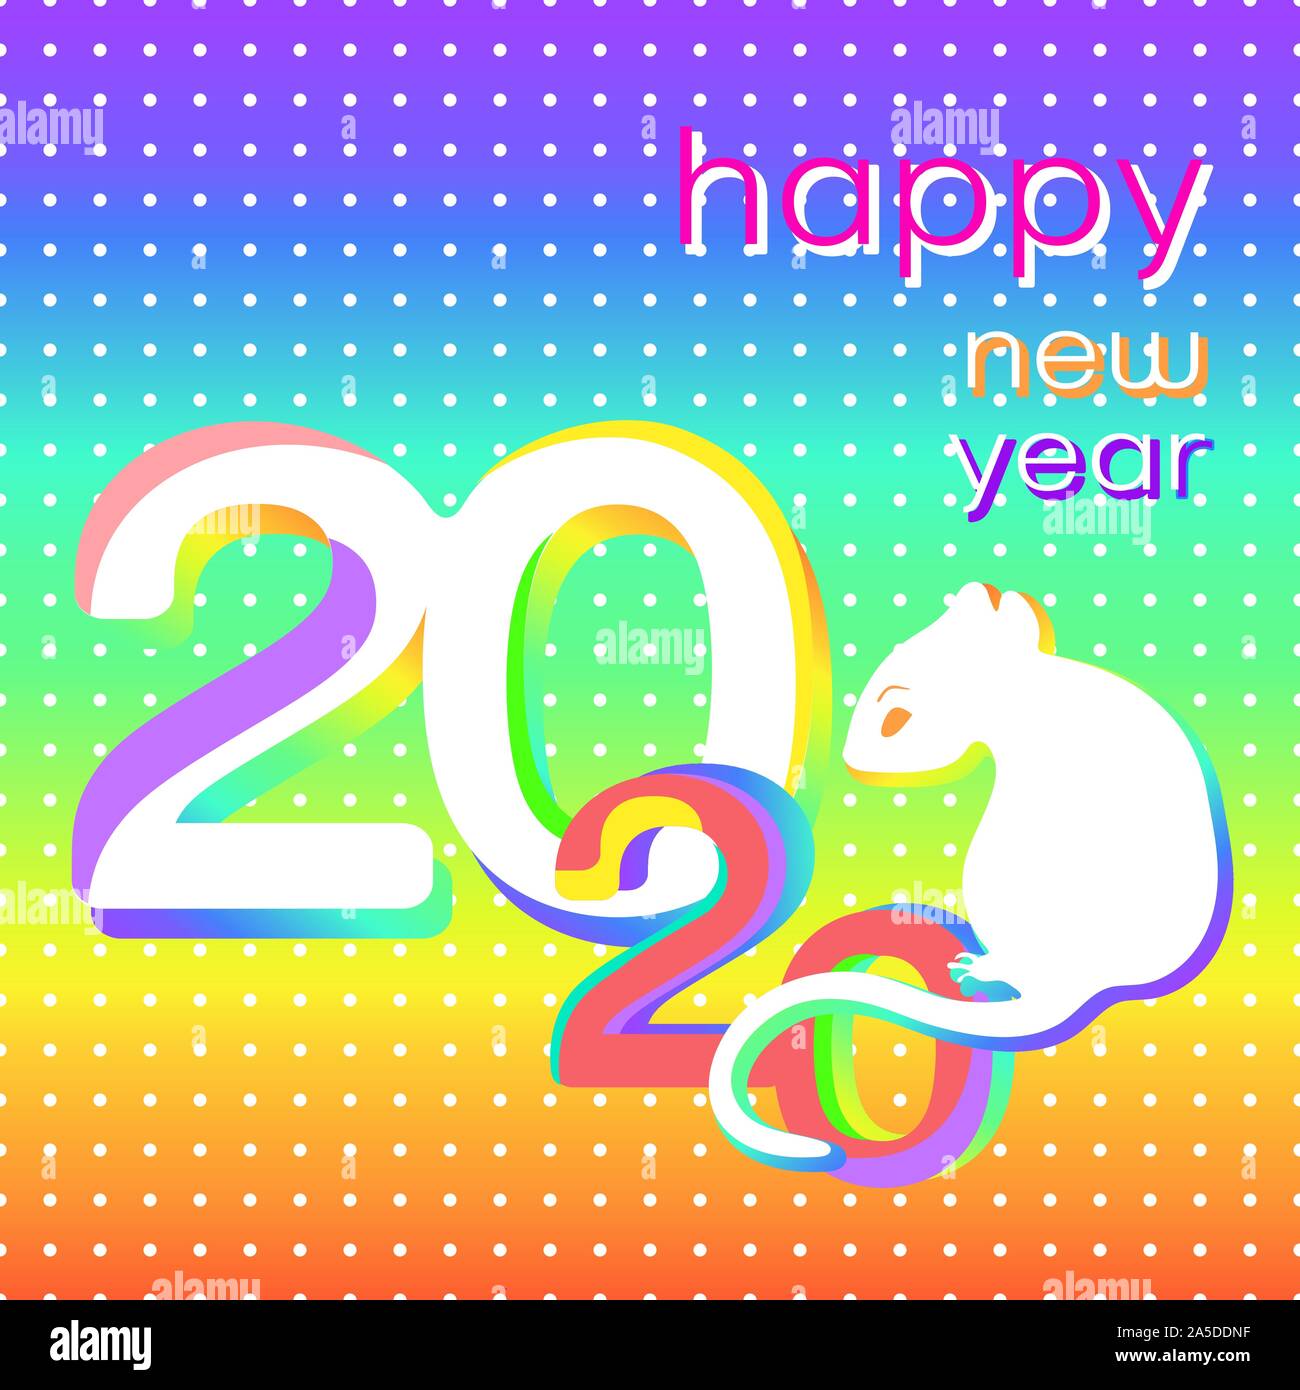 Happy New Year creative card, bright colorful banner, 2020 logo, icon, vector illustration. White rat, symbol of the year, sitting colorful numbers 20 Stock Vector